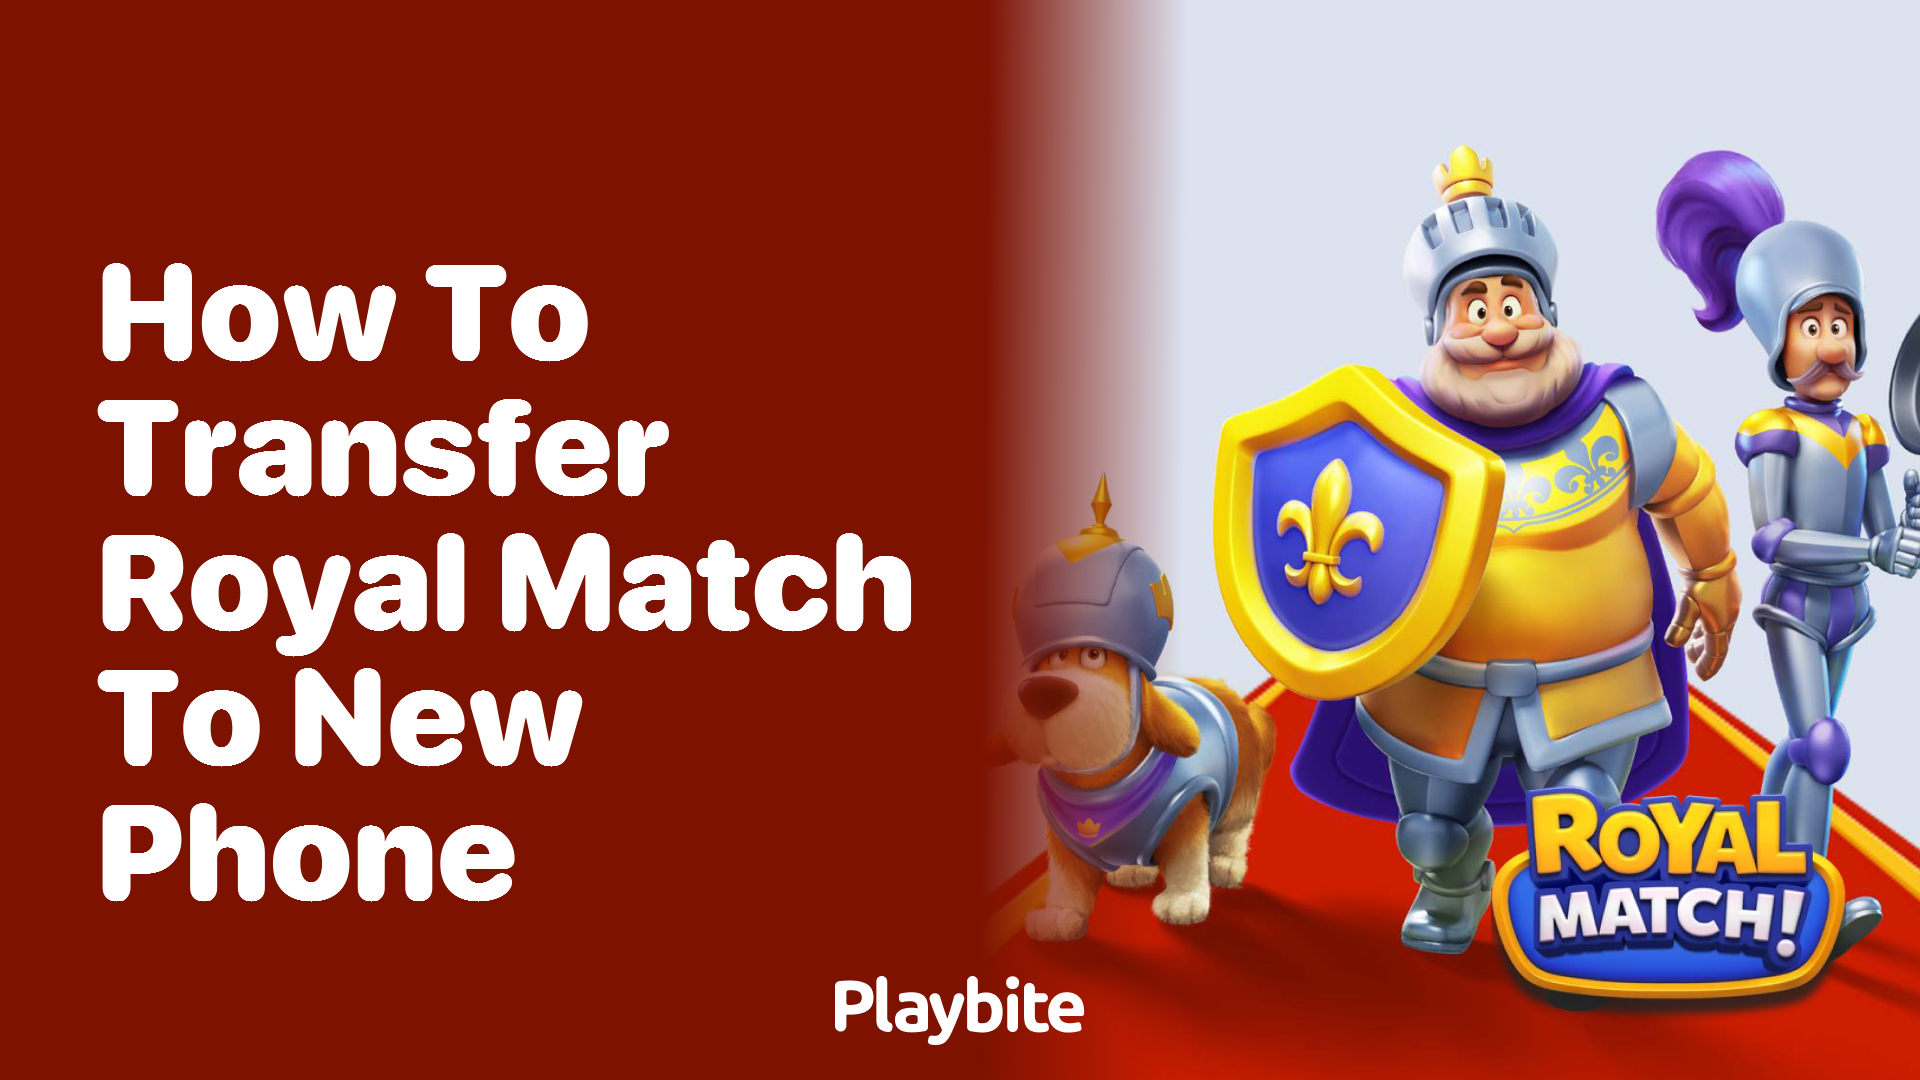 How to Transfer Royal Match to a New Phone